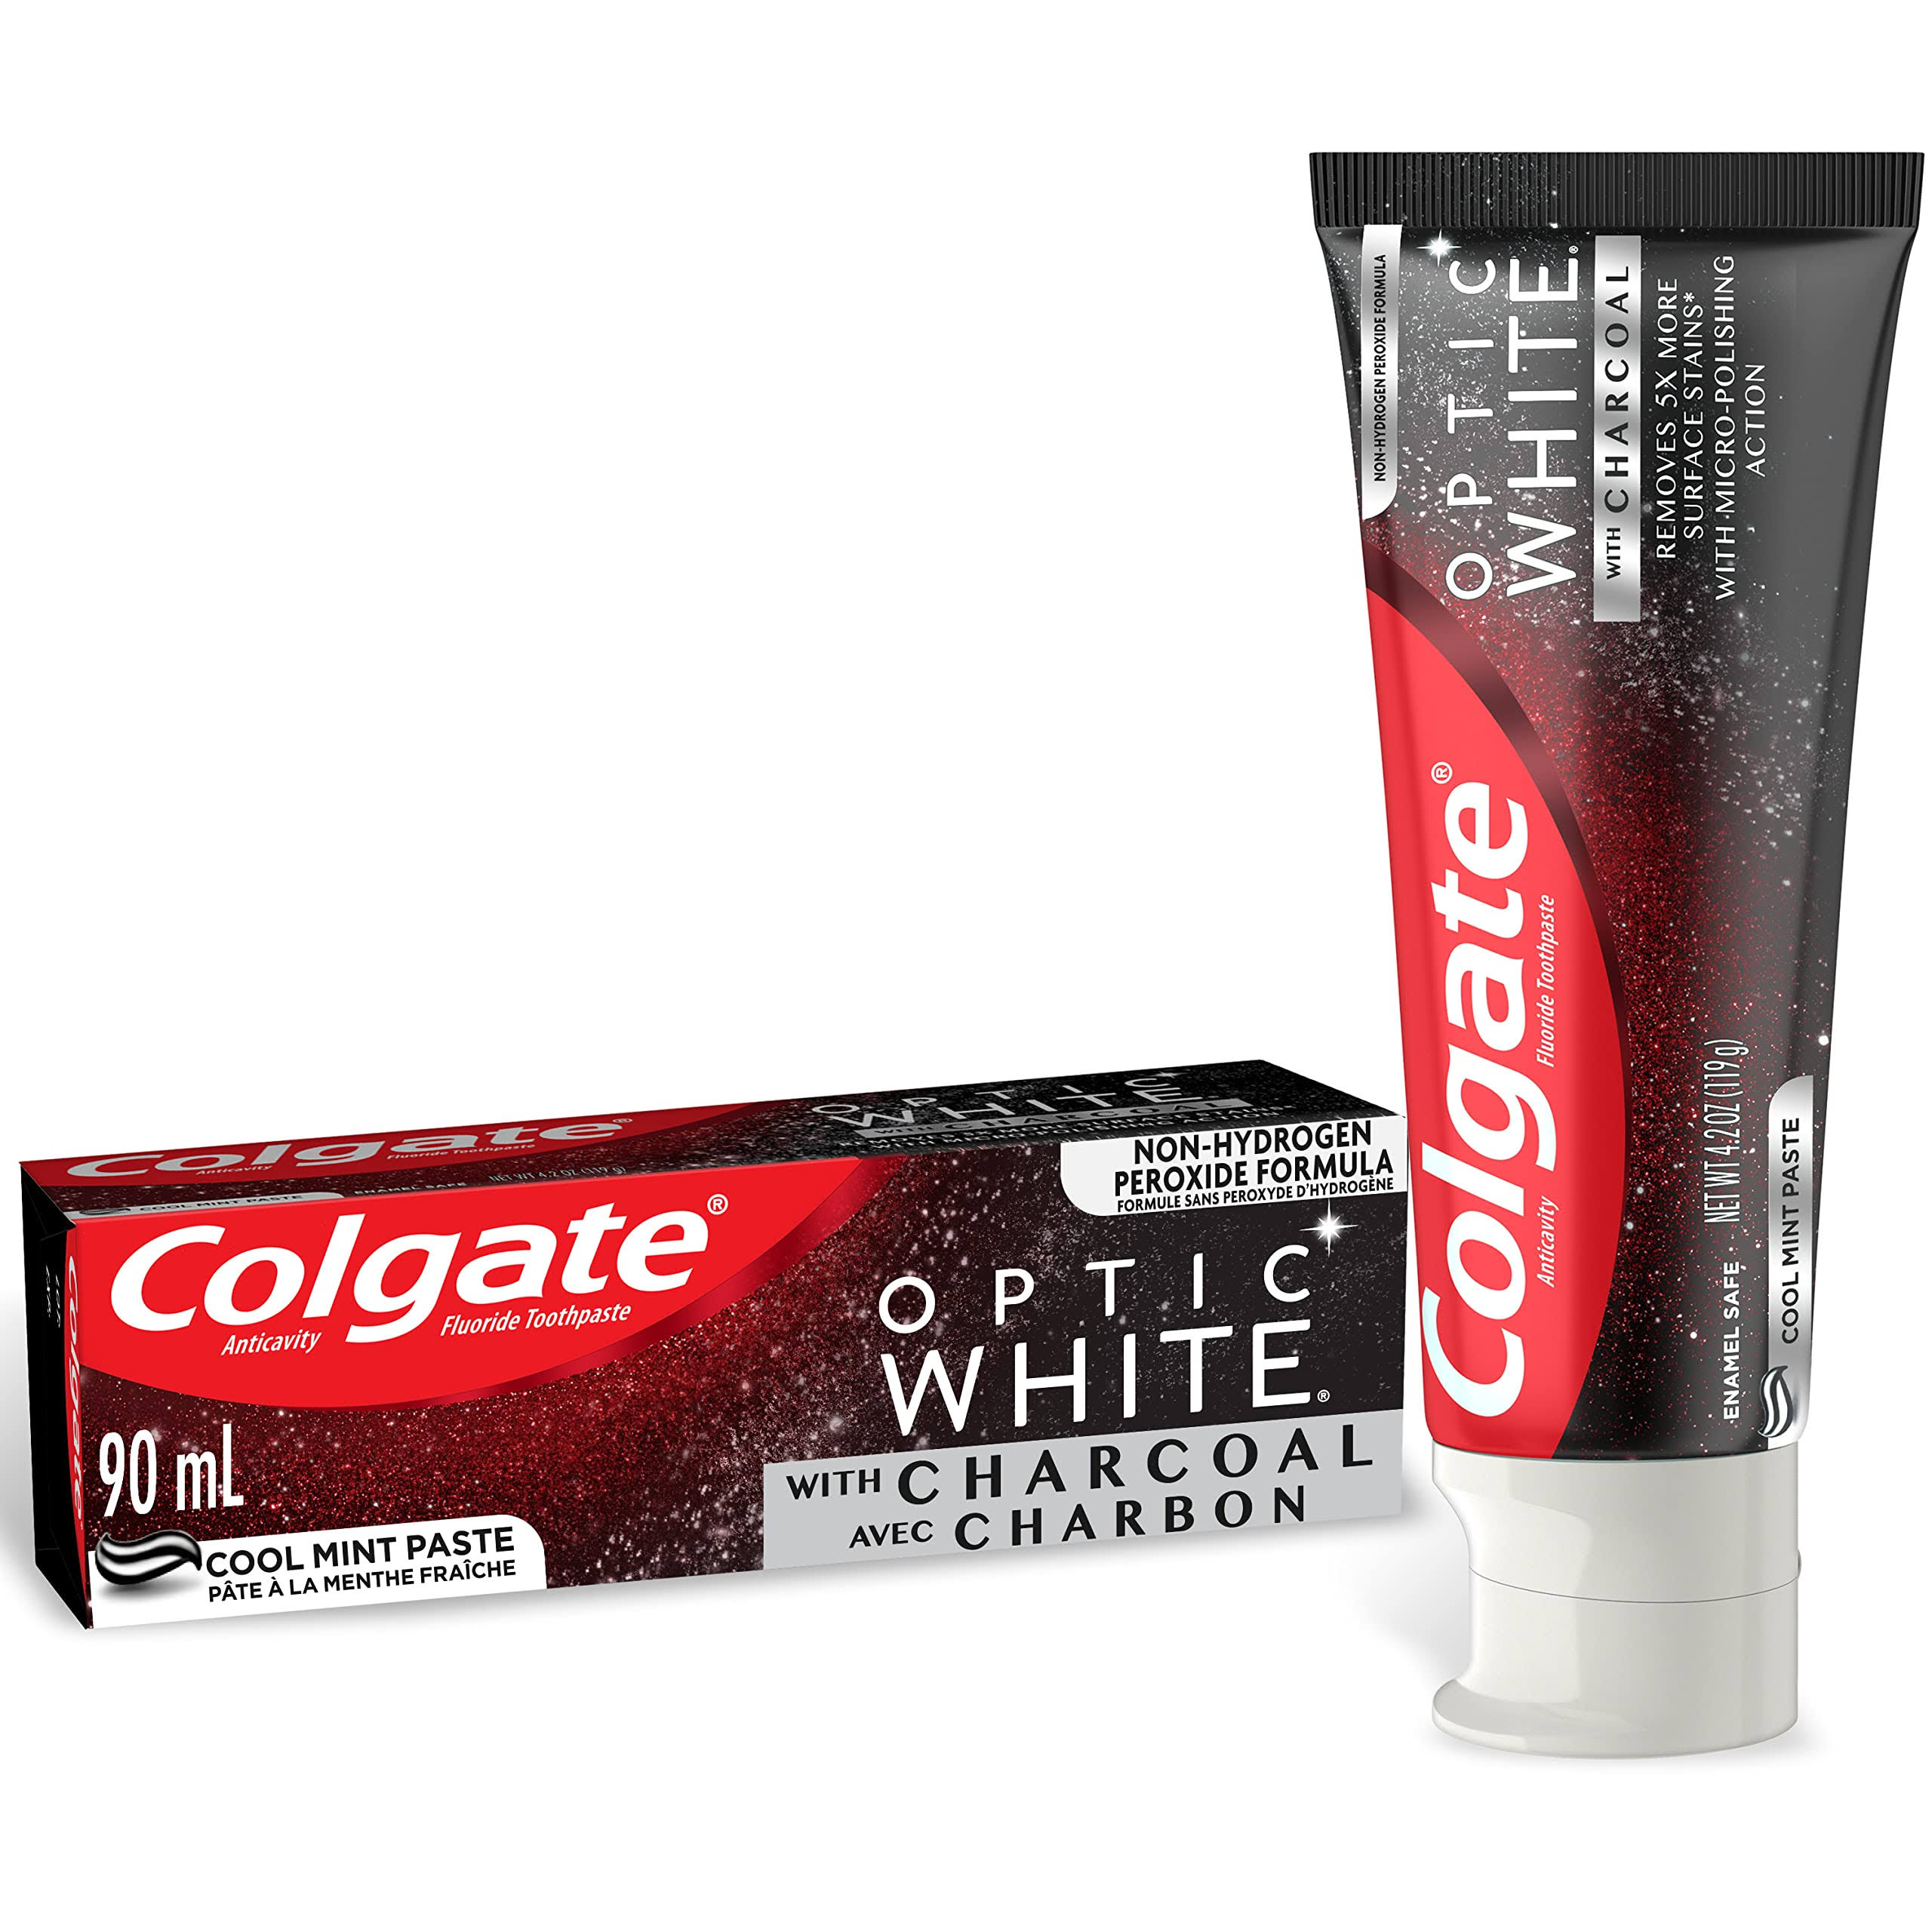 Colgate Optic White with Charcoal Toothpaste, Cool Mint Paste, 90 mL